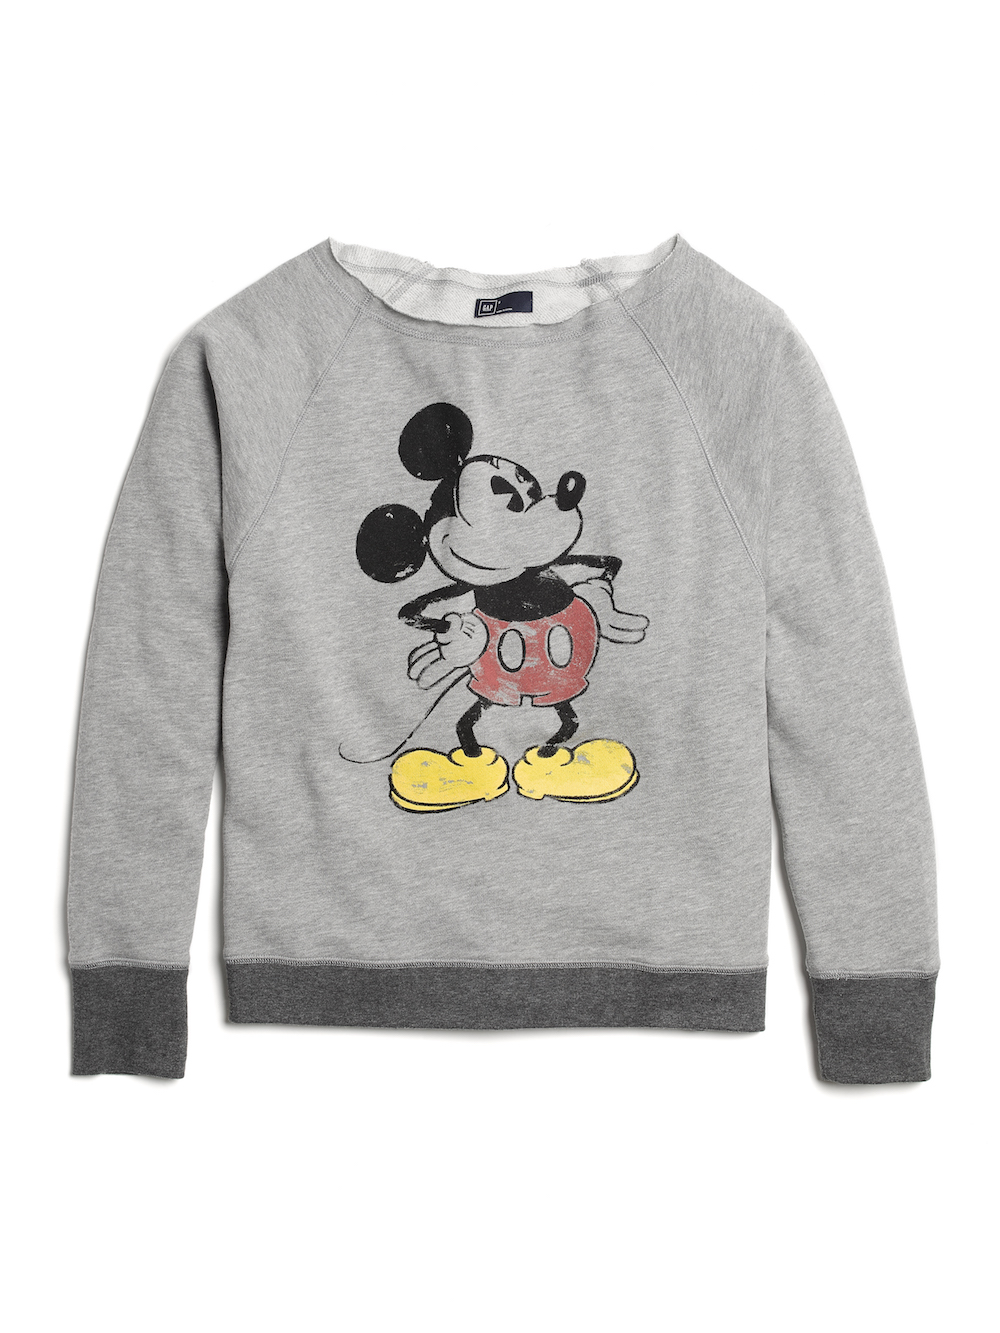 New Disney x Gap Collection To Debut In Stores This December - Fashion